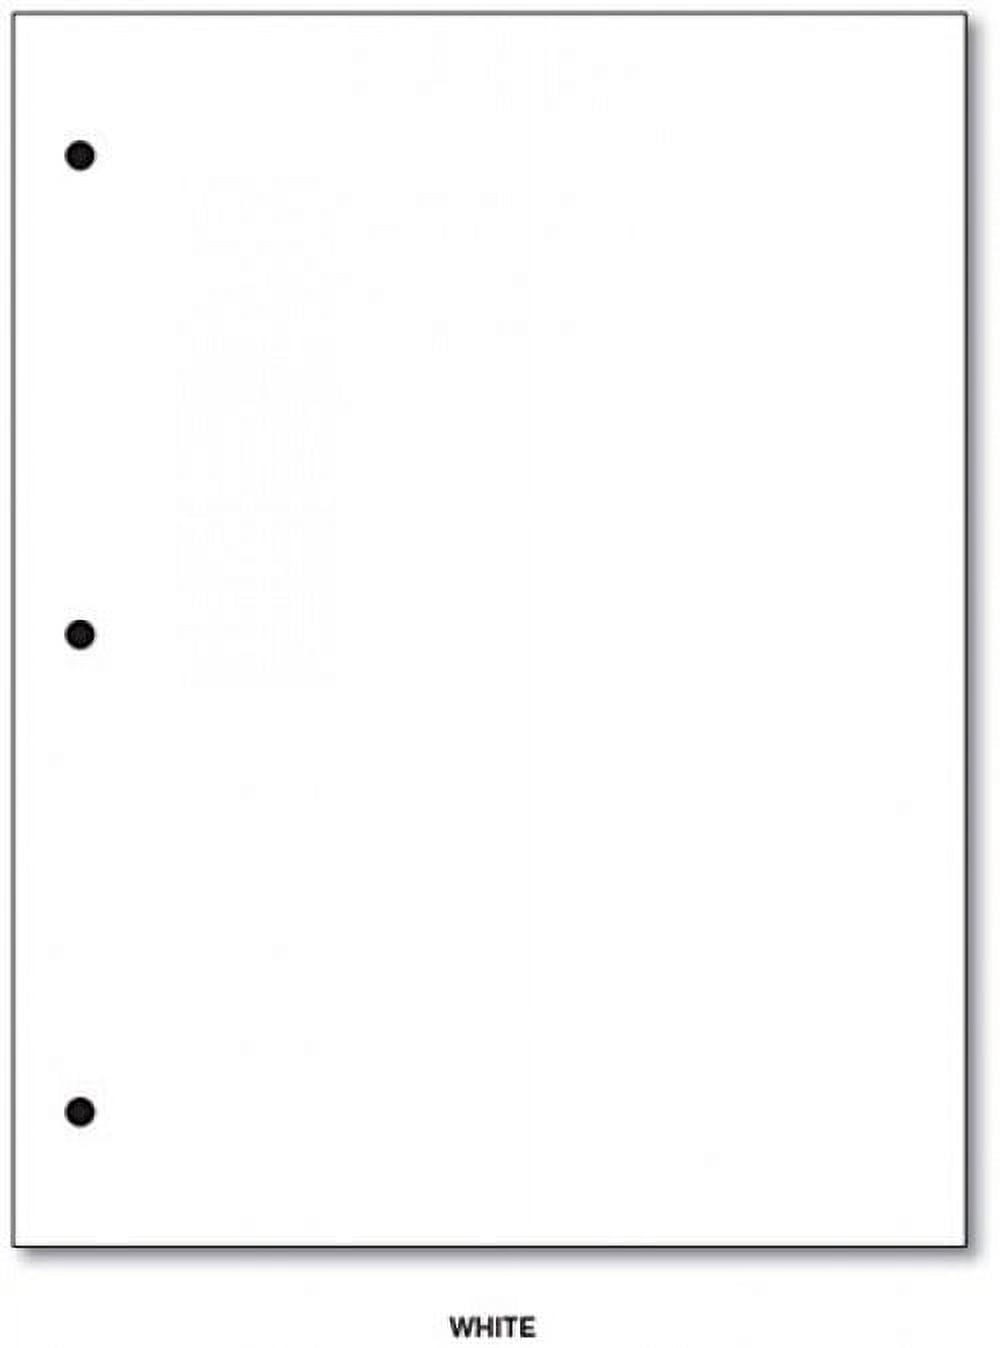  STP122457  Staples FSC-Certified 3-Hole Punched Copy Paper - 20  lb. - 8.5 x 11 - White - 5000 Sheets